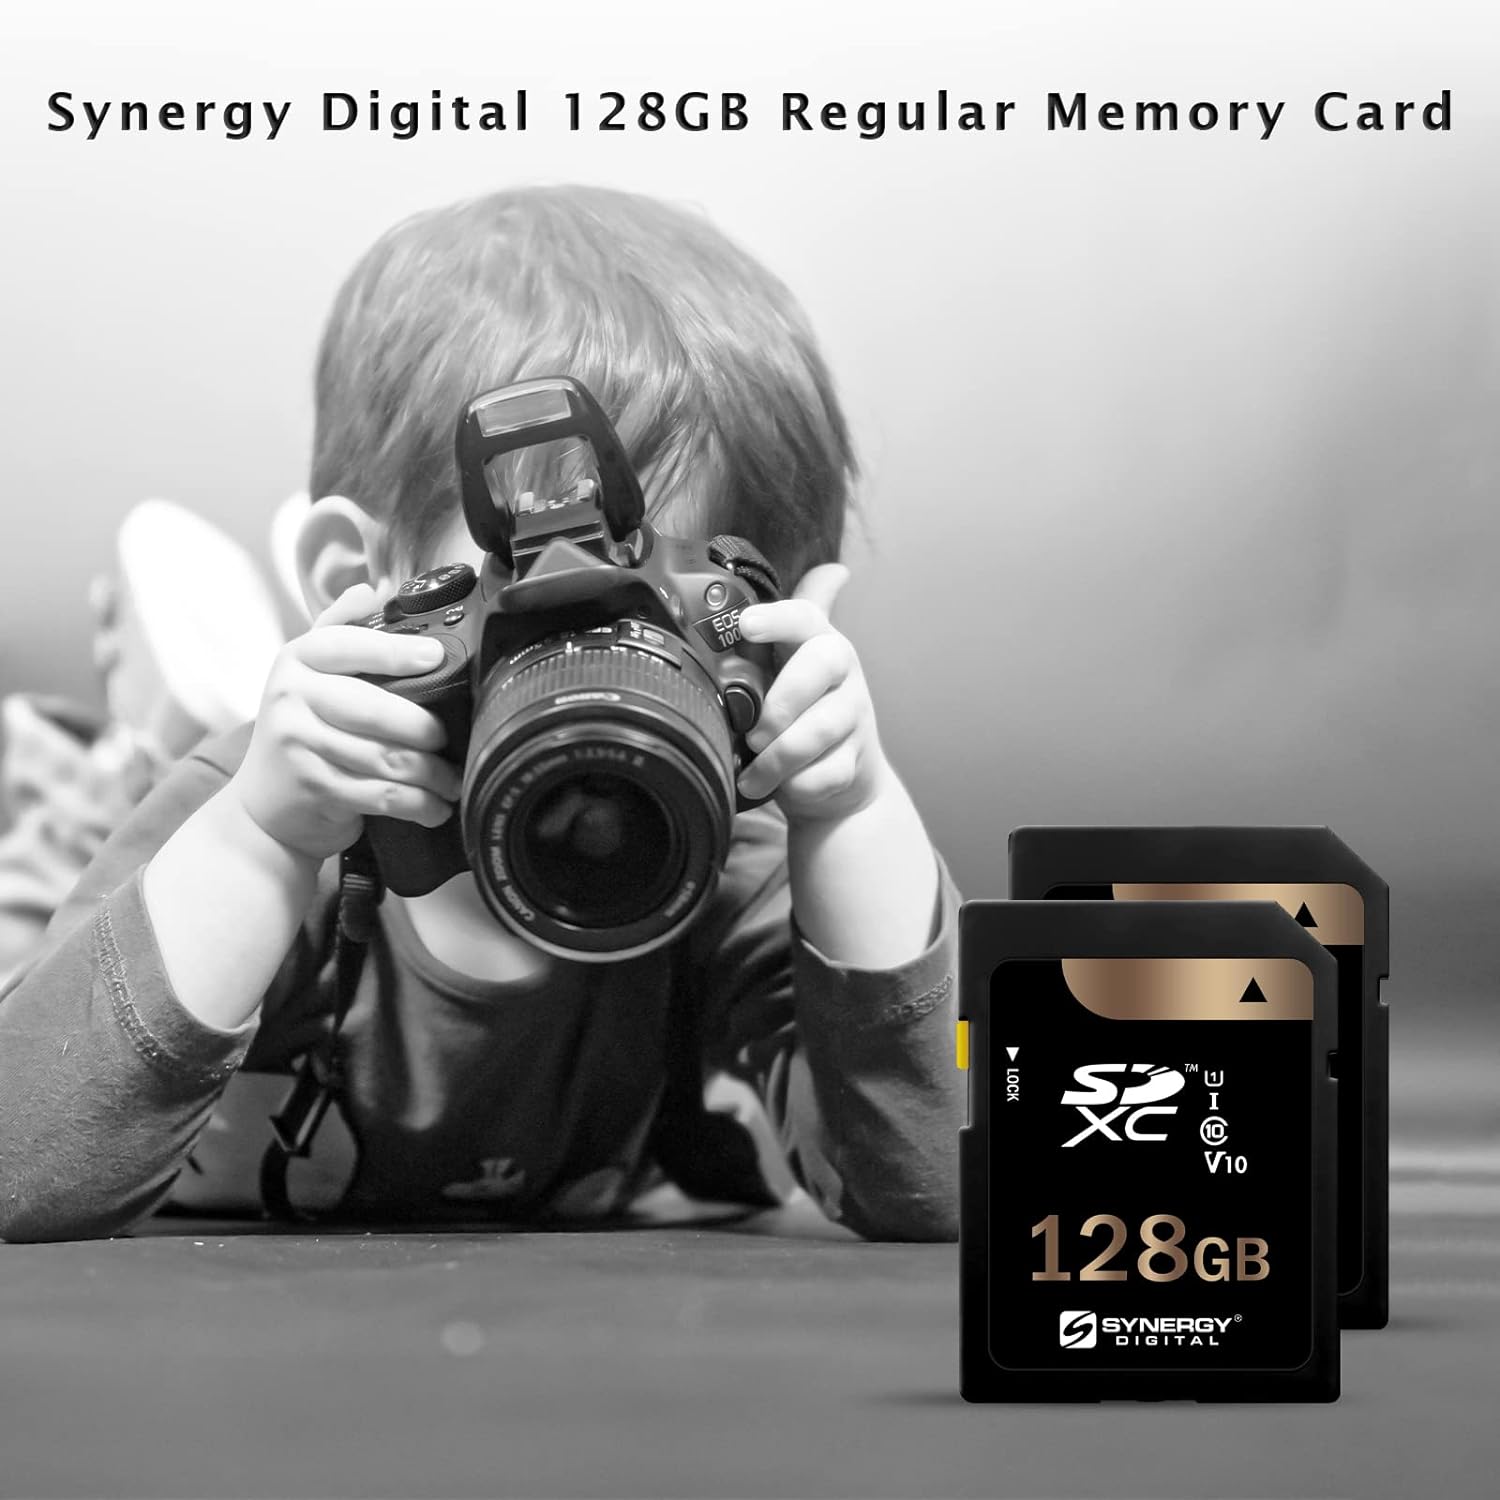 Synergy Digital 128GB, SDXC UHS-I Memory Cards - Class 10, U1, 100MB/s, 300 Series - Pack of 2